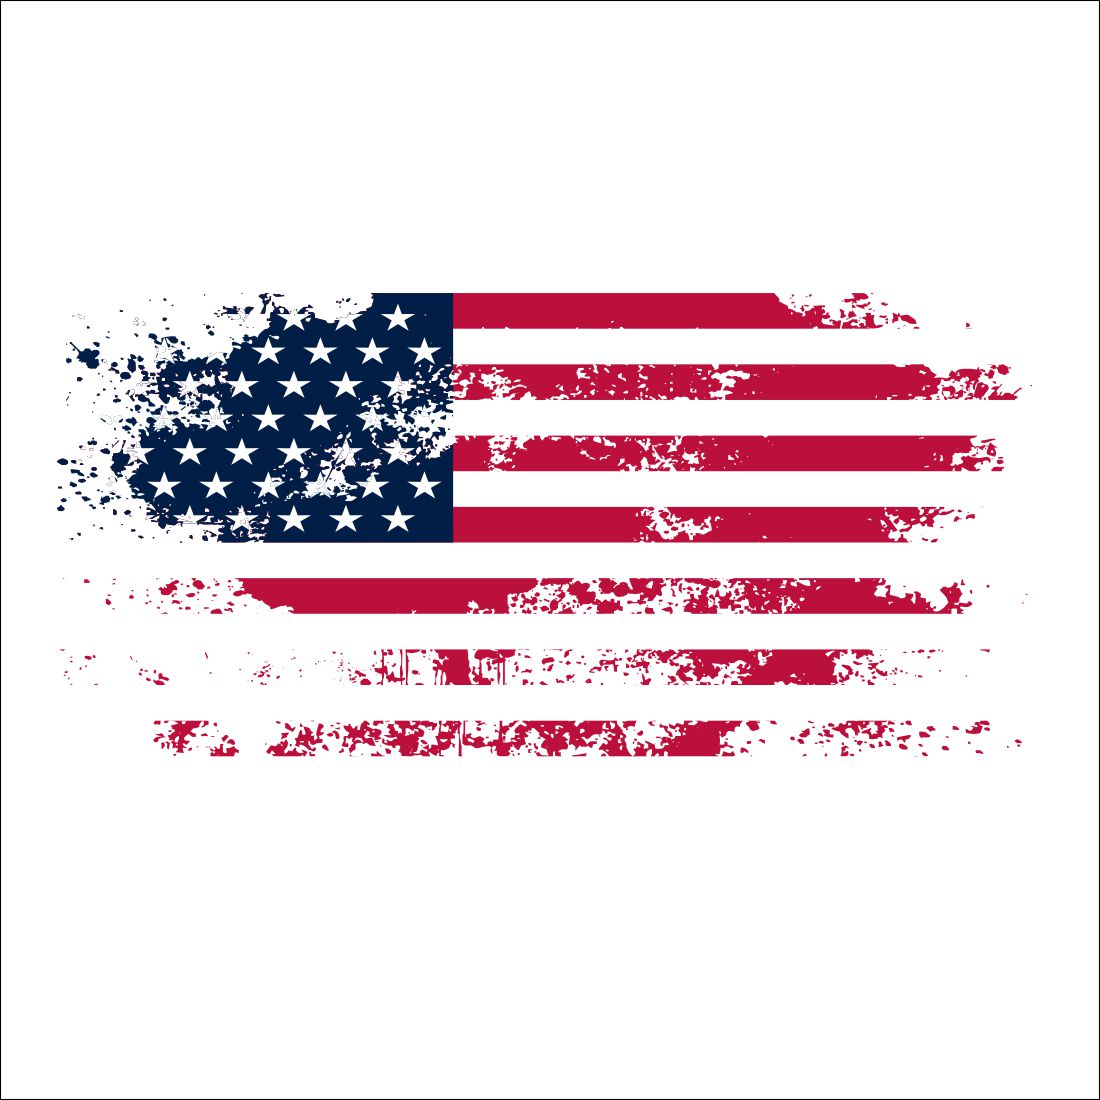 American flag painted on a white background.